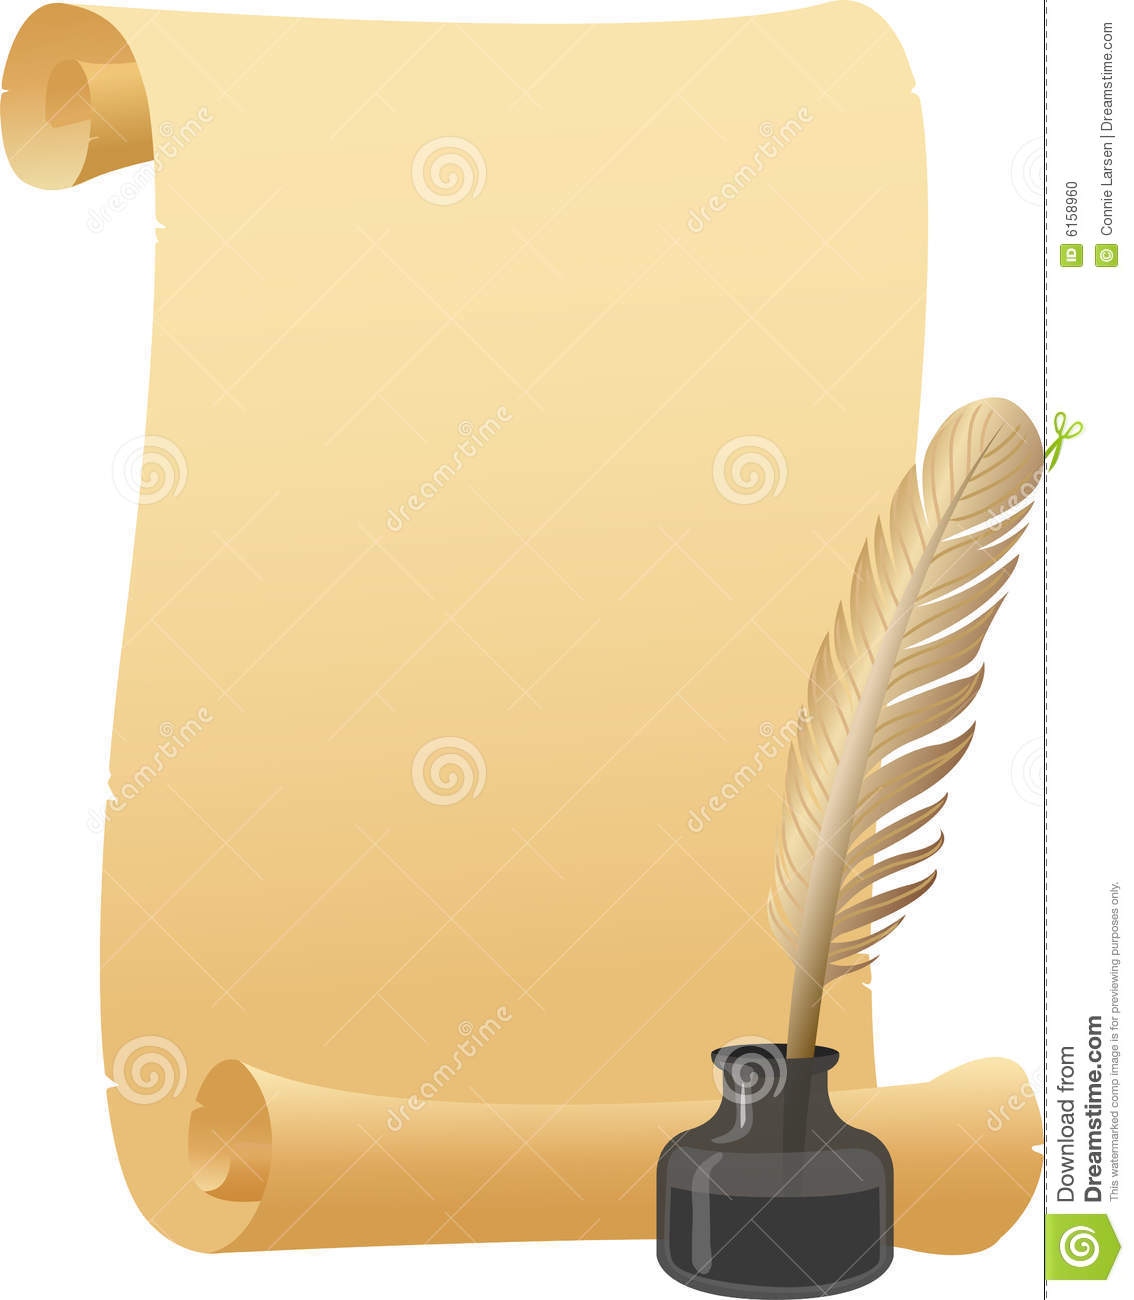 Parchment Scroll Quill Pen Eps Stock Photo   Image  6158960